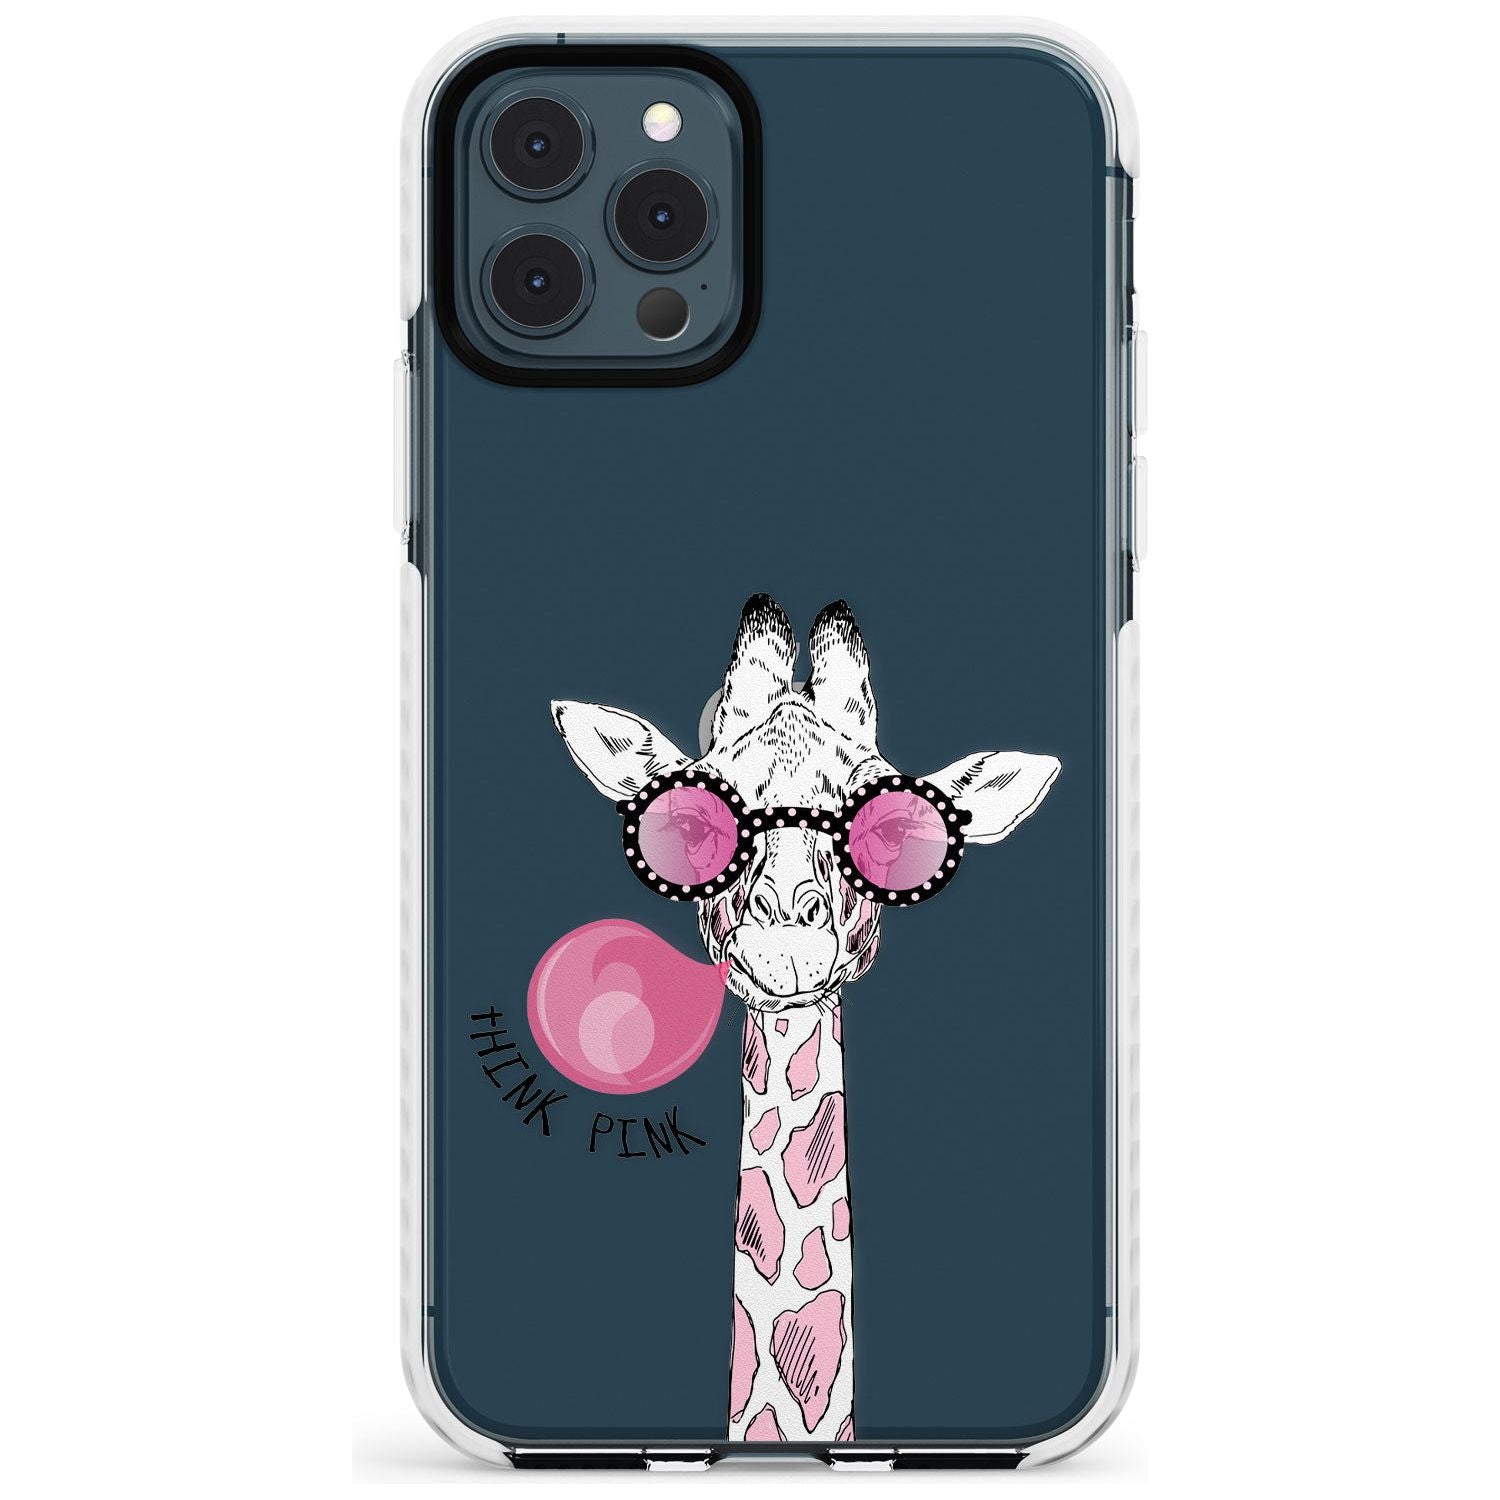 Think Pink Giraffe Impact Phone Case for iPhone 11 Pro Max